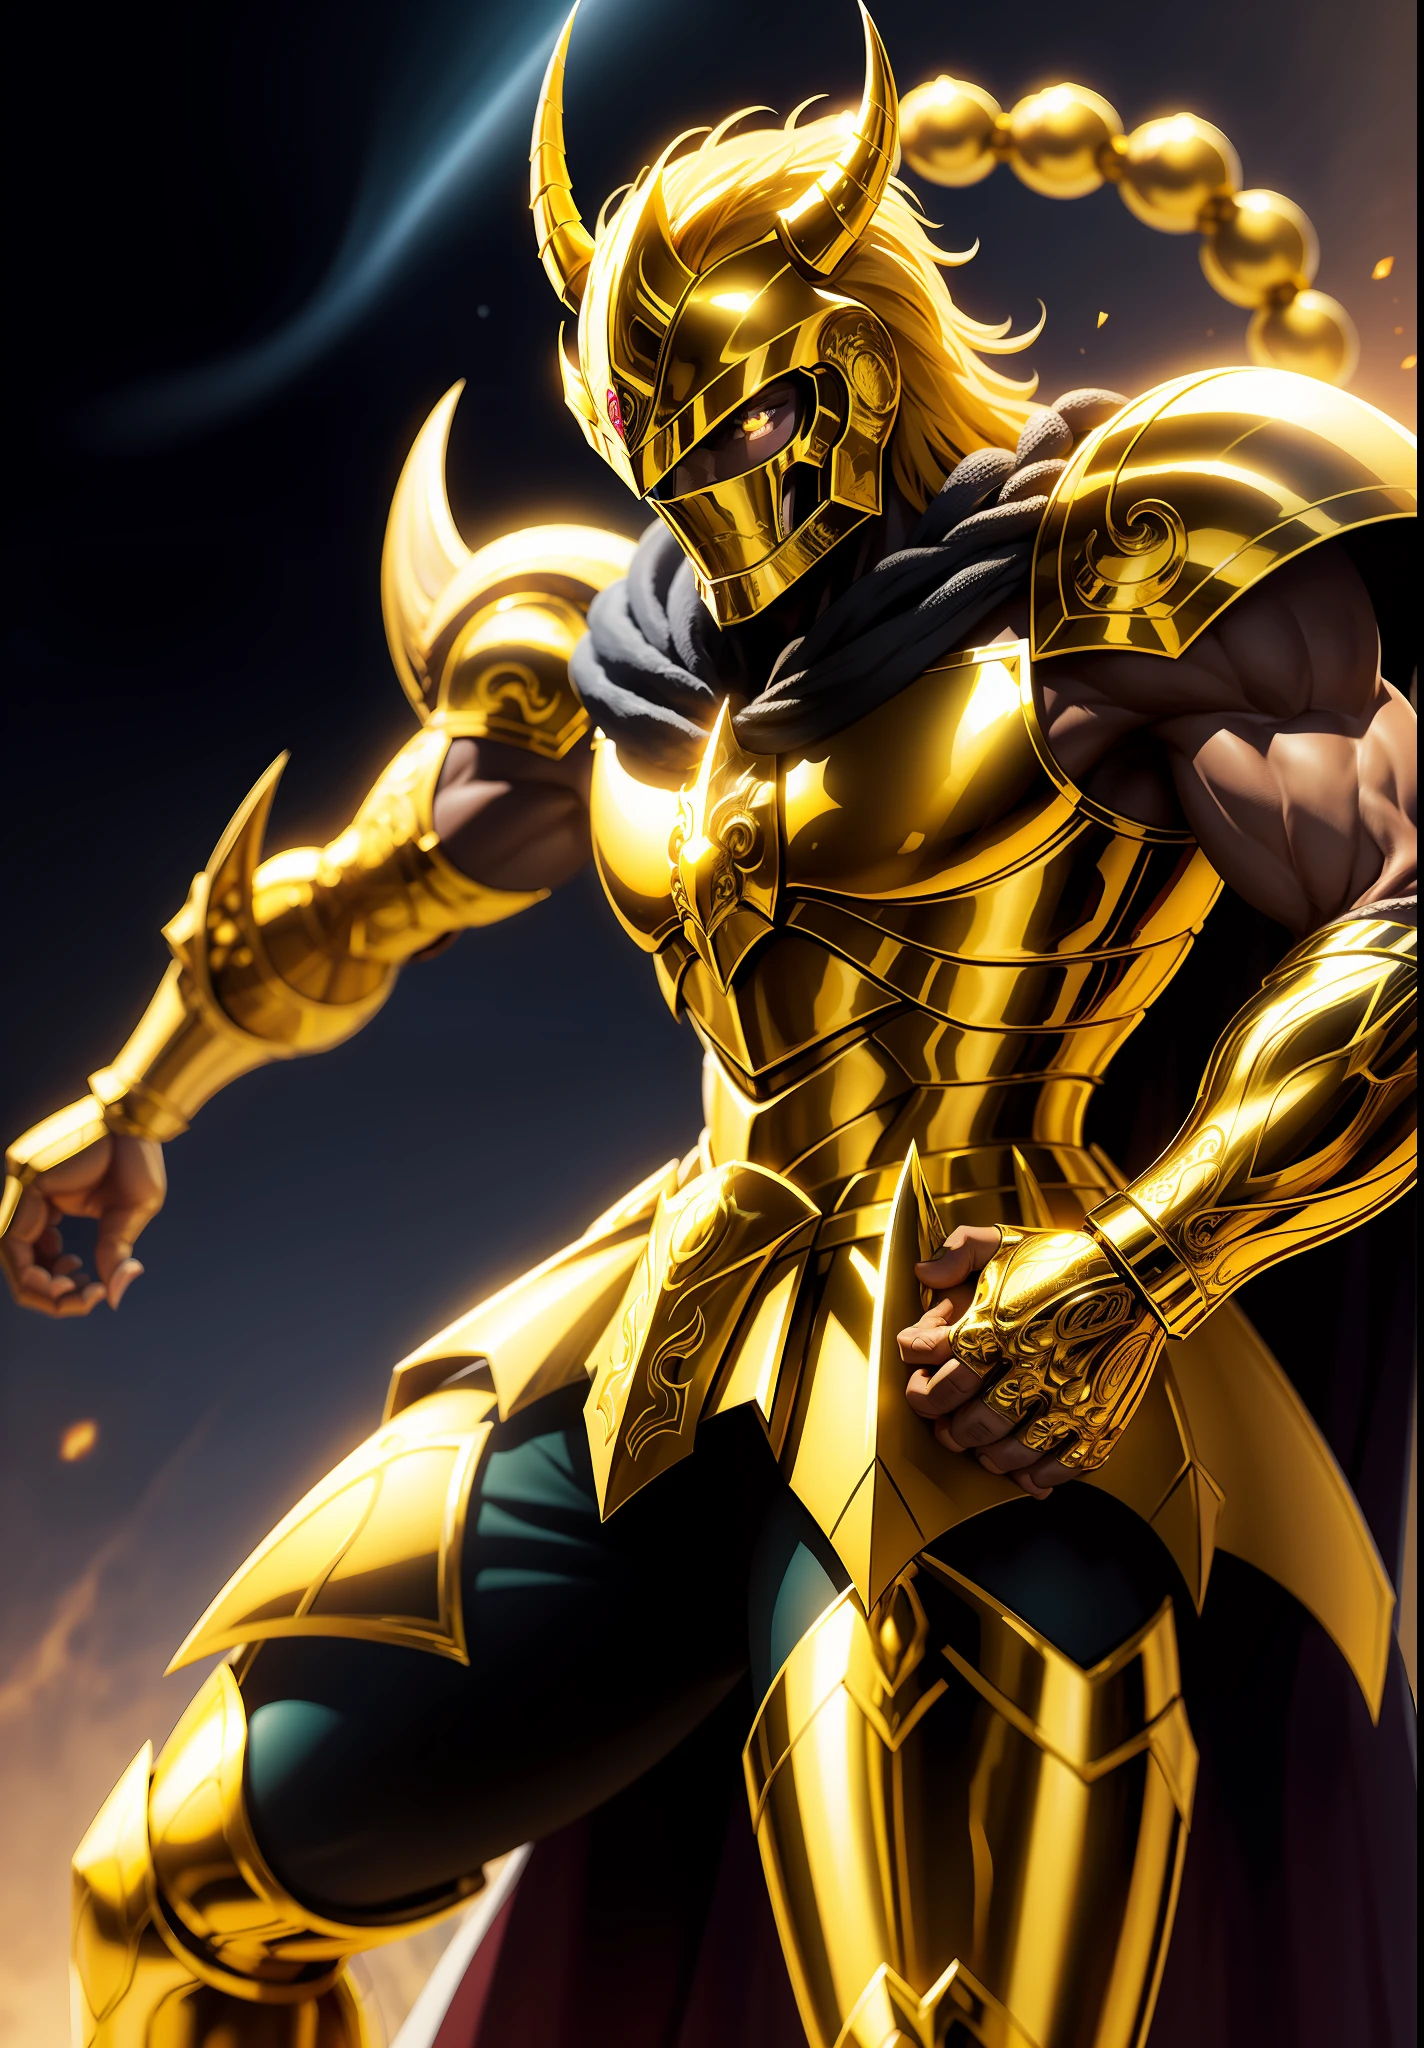 Knight character with golden armor de escorpião , knight of theKnight character with golden armor, knight of the zodiac Scorpion , in the background in imposing scorpion king auroboeal in the sky, 8k high definition, intricate details, breathtaking quality